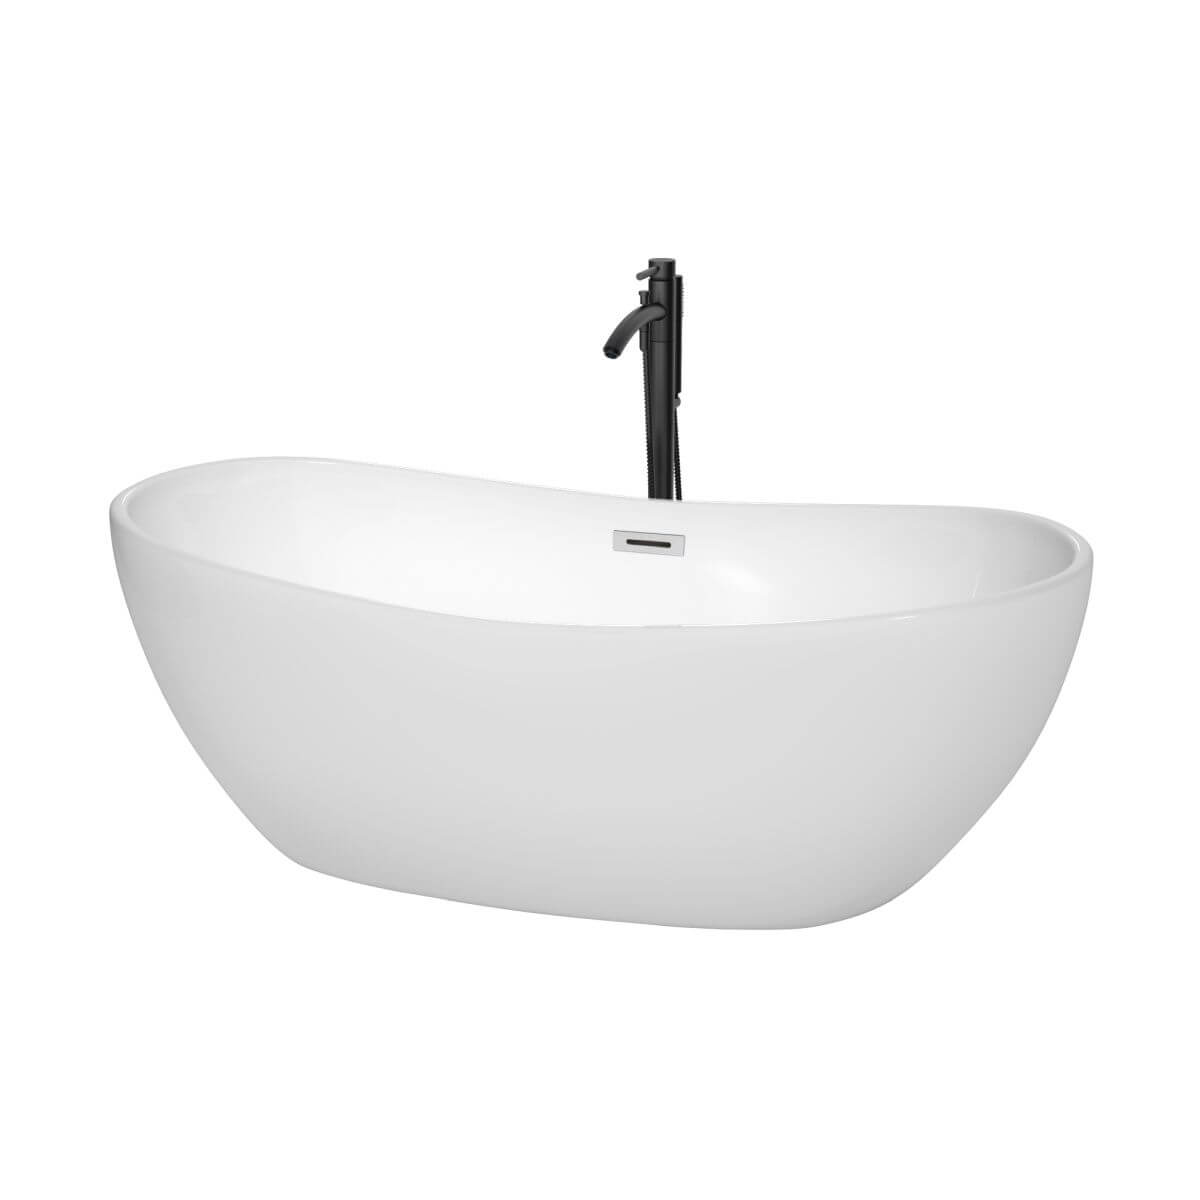 Wyndham Collection Rebecca 65 inch Freestanding Bathtub in White with Polished Chrome Trim and Floor Mounted Faucet in Matte Black - WCOBT101465PCATPBK